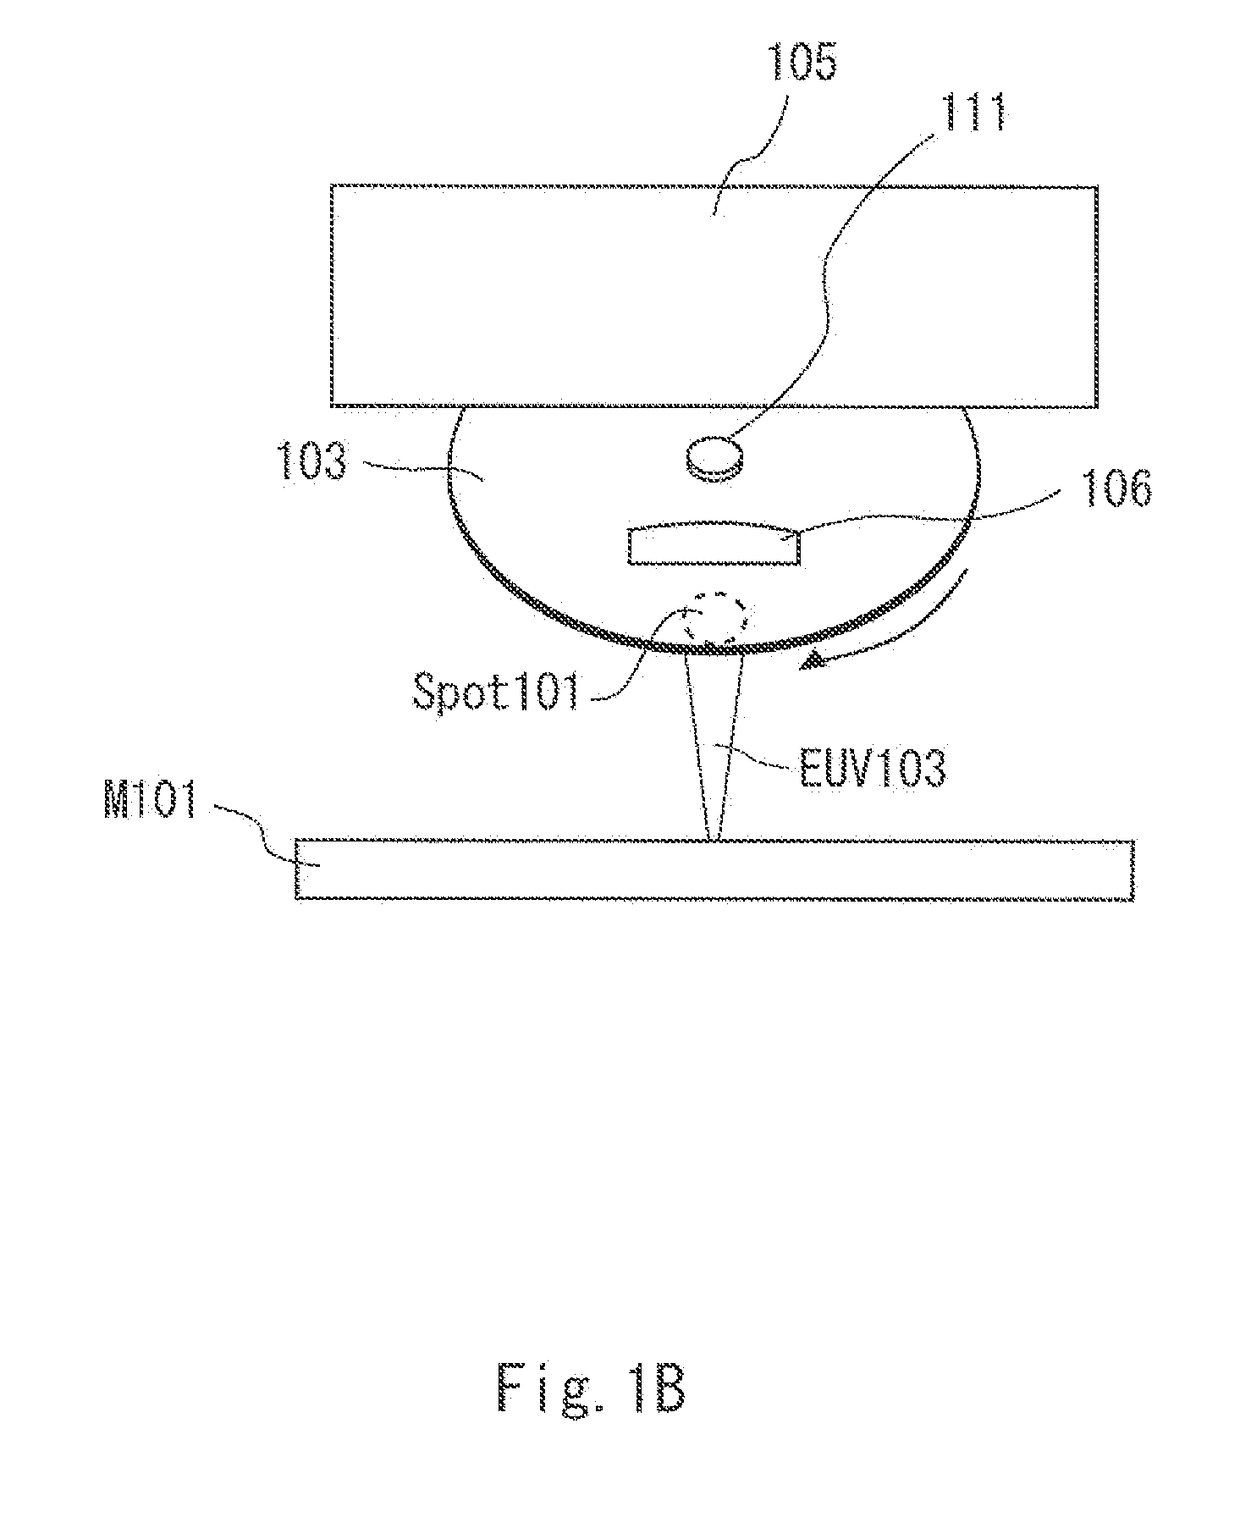 Mask inspection apparatus and mask inspection method